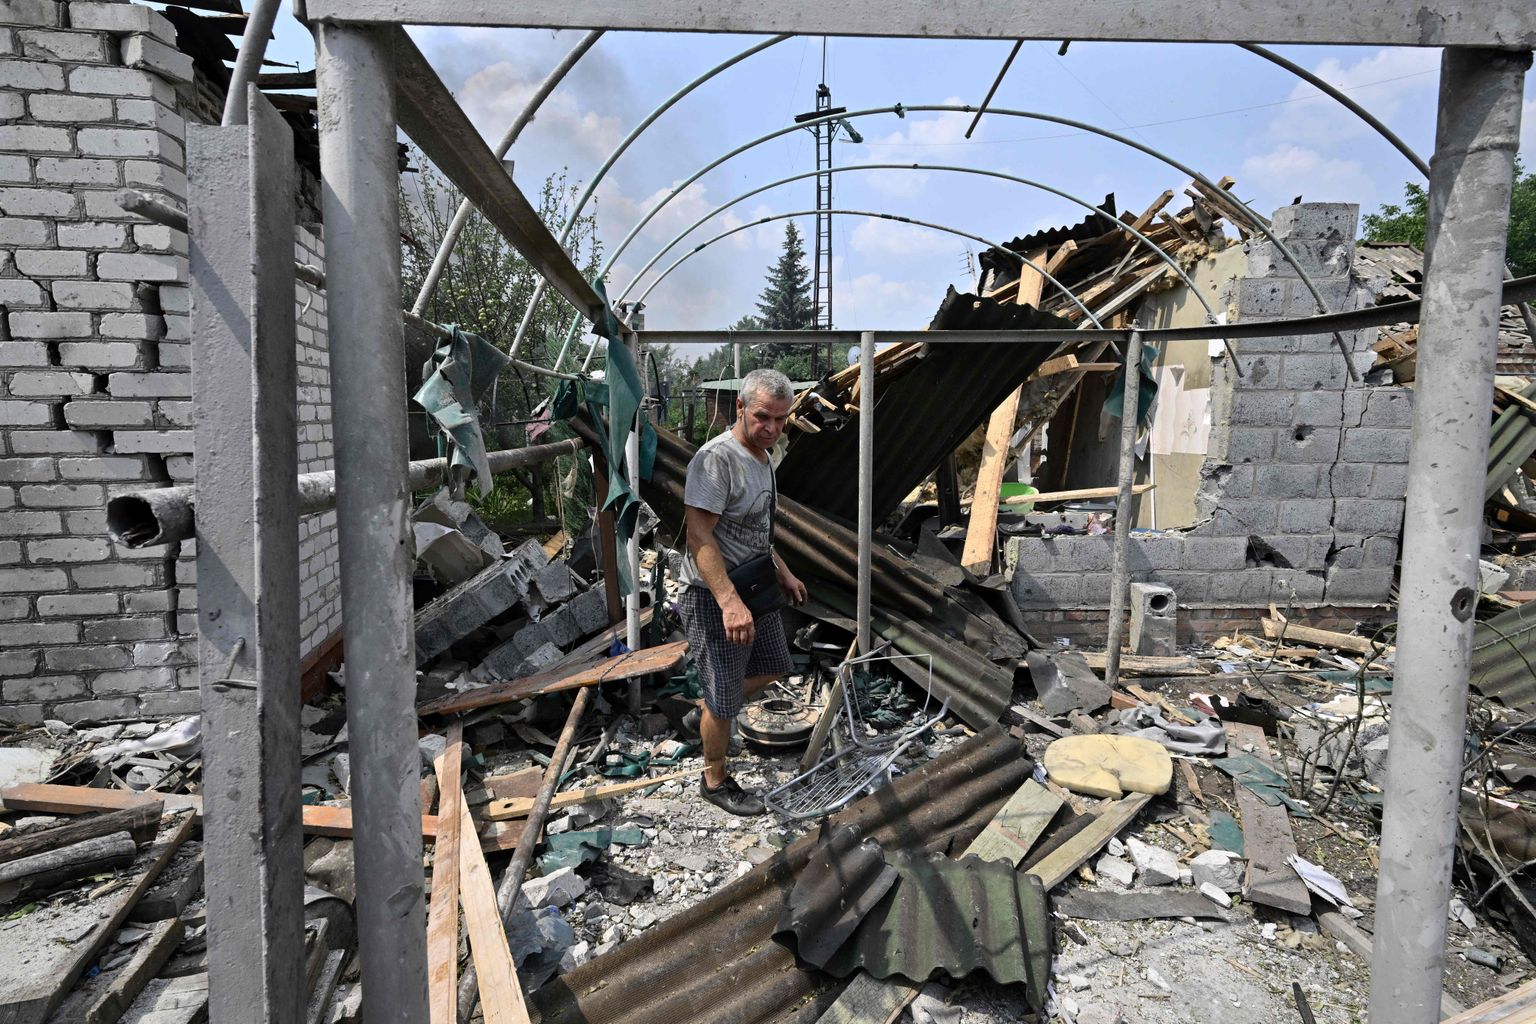 TOPSHOT - A resident walks among debris next to a destroyed house in Sloviansk on July 4, 2022, the day after a Russian rocket attack. (Photo by Genya SAVILOV / AFP)